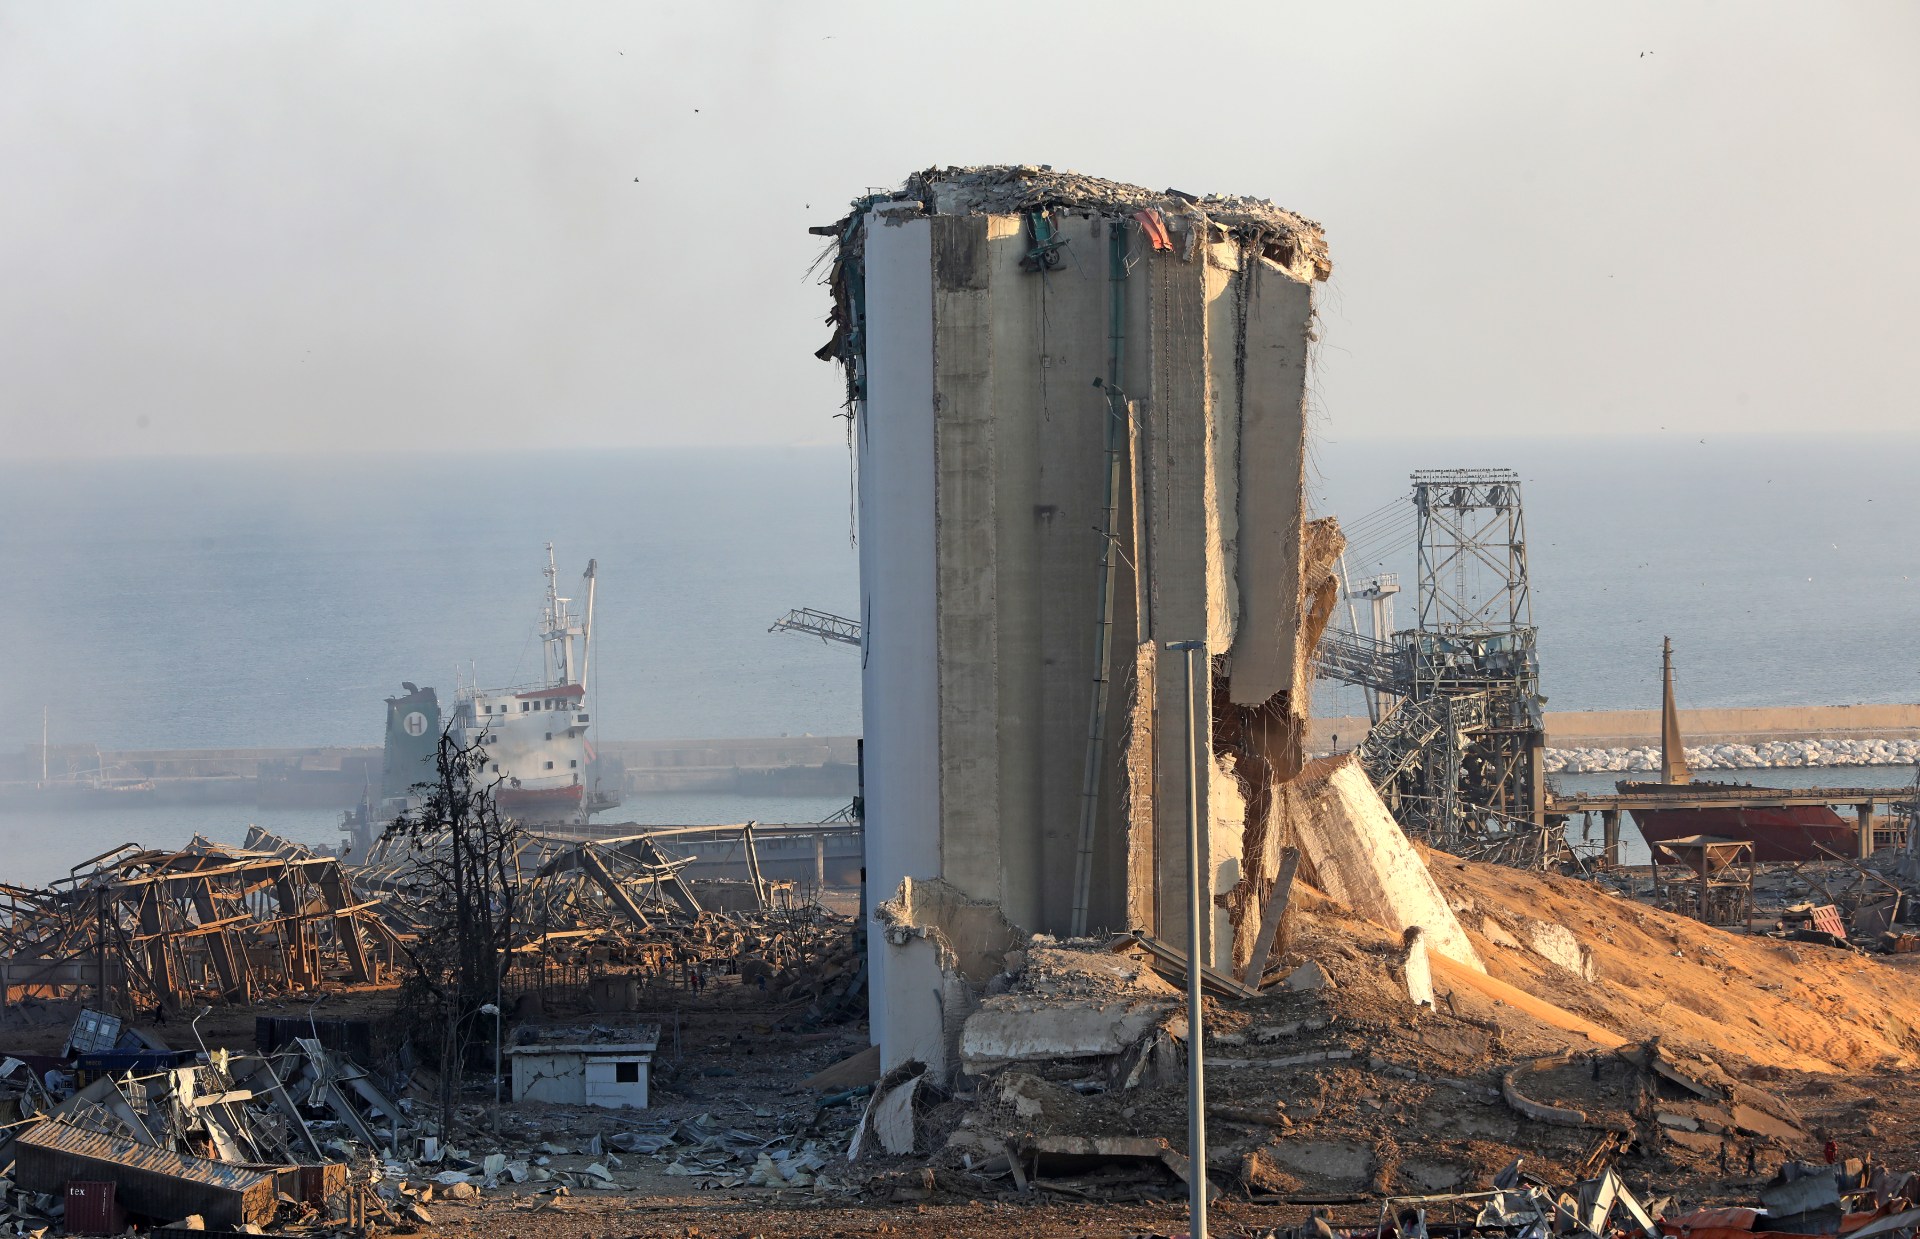 A destroyed silo is seen amid the rubble and debris following yesterday's blast at the port (AFP)